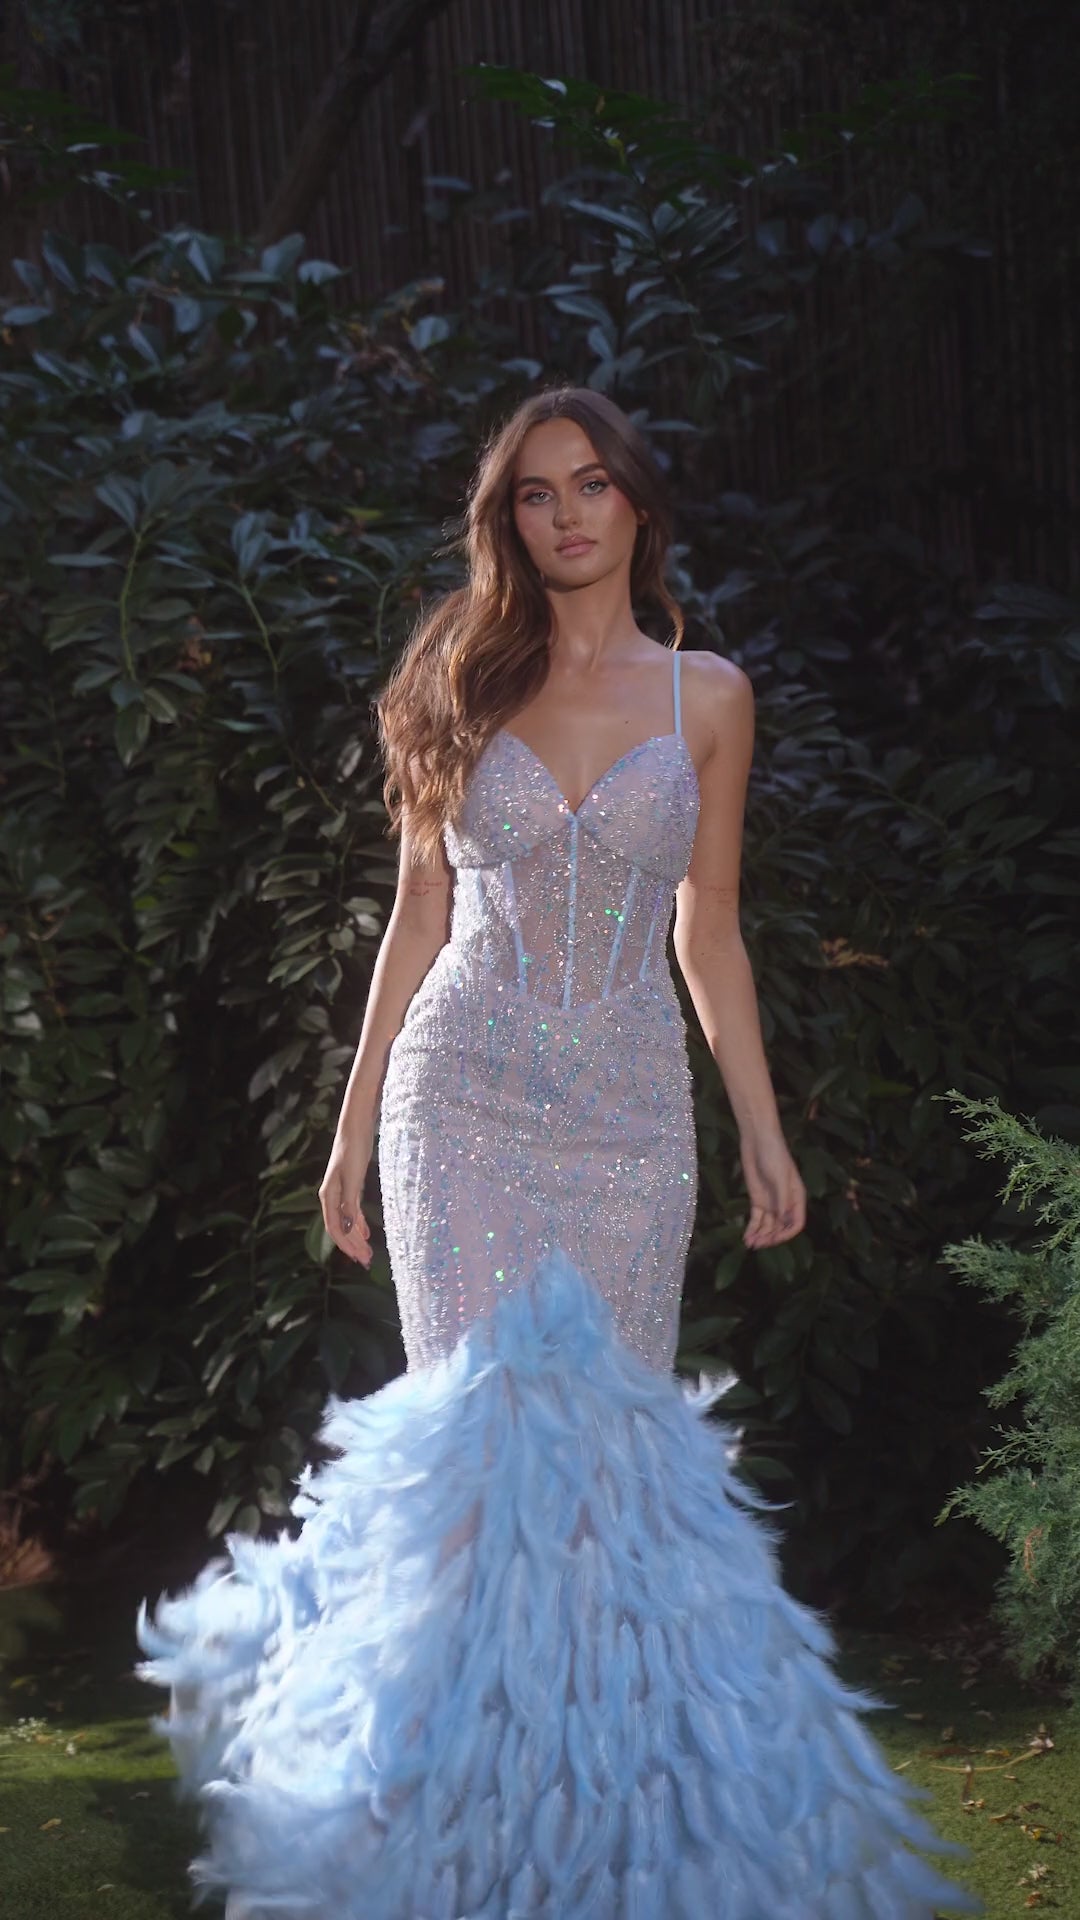 Get ready to turn heads in this stunning Andrea & Leo Couture A1298 dress. With a sheer corset bodice and glittering feather details, this mermaid prom dress is sure to make a statement. The perfect choice for any formal event, you'll feel confident and glamorous all night long. 